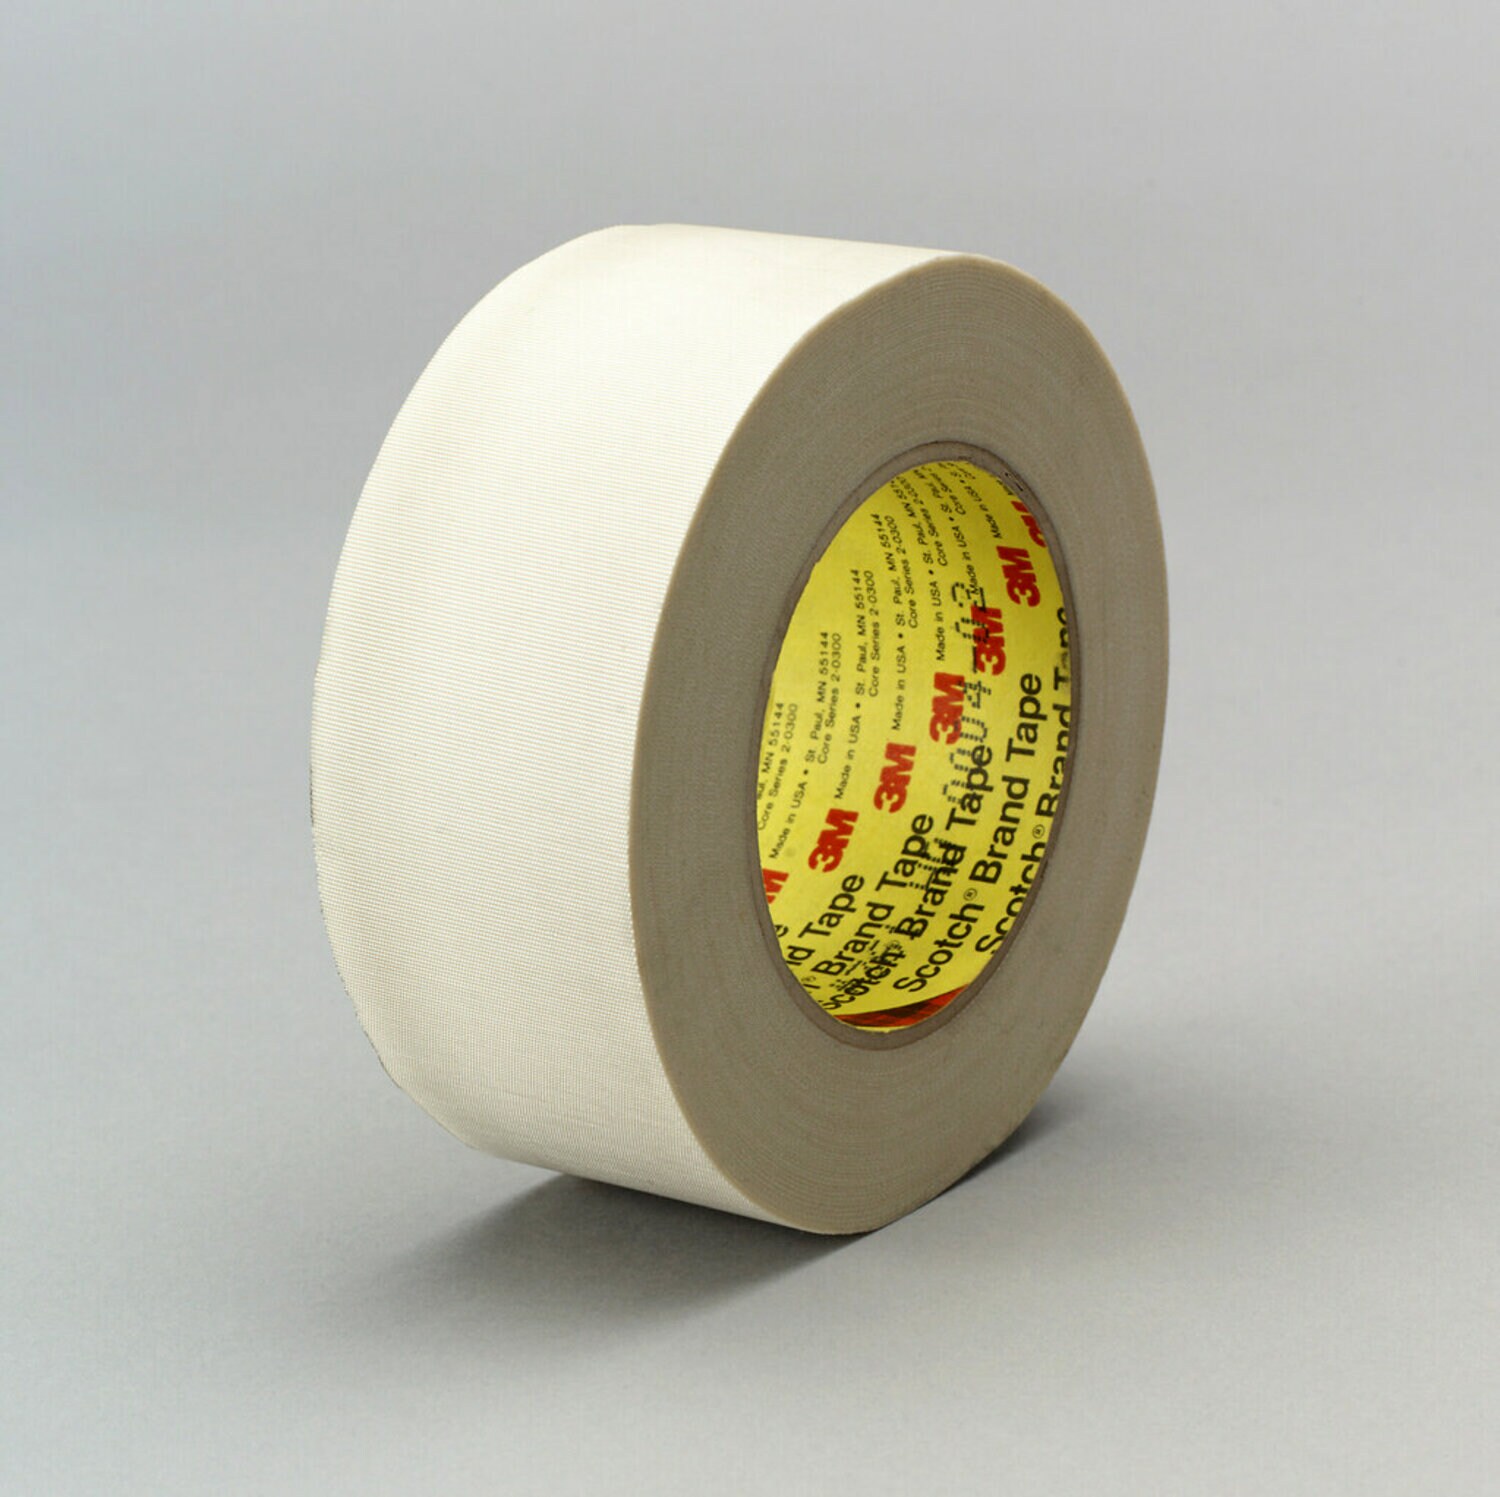 7010312330 - 3M Glass Cloth Tape 361, White, 12 in x 60 yd, 6.4 mil, 1 Roll/Case